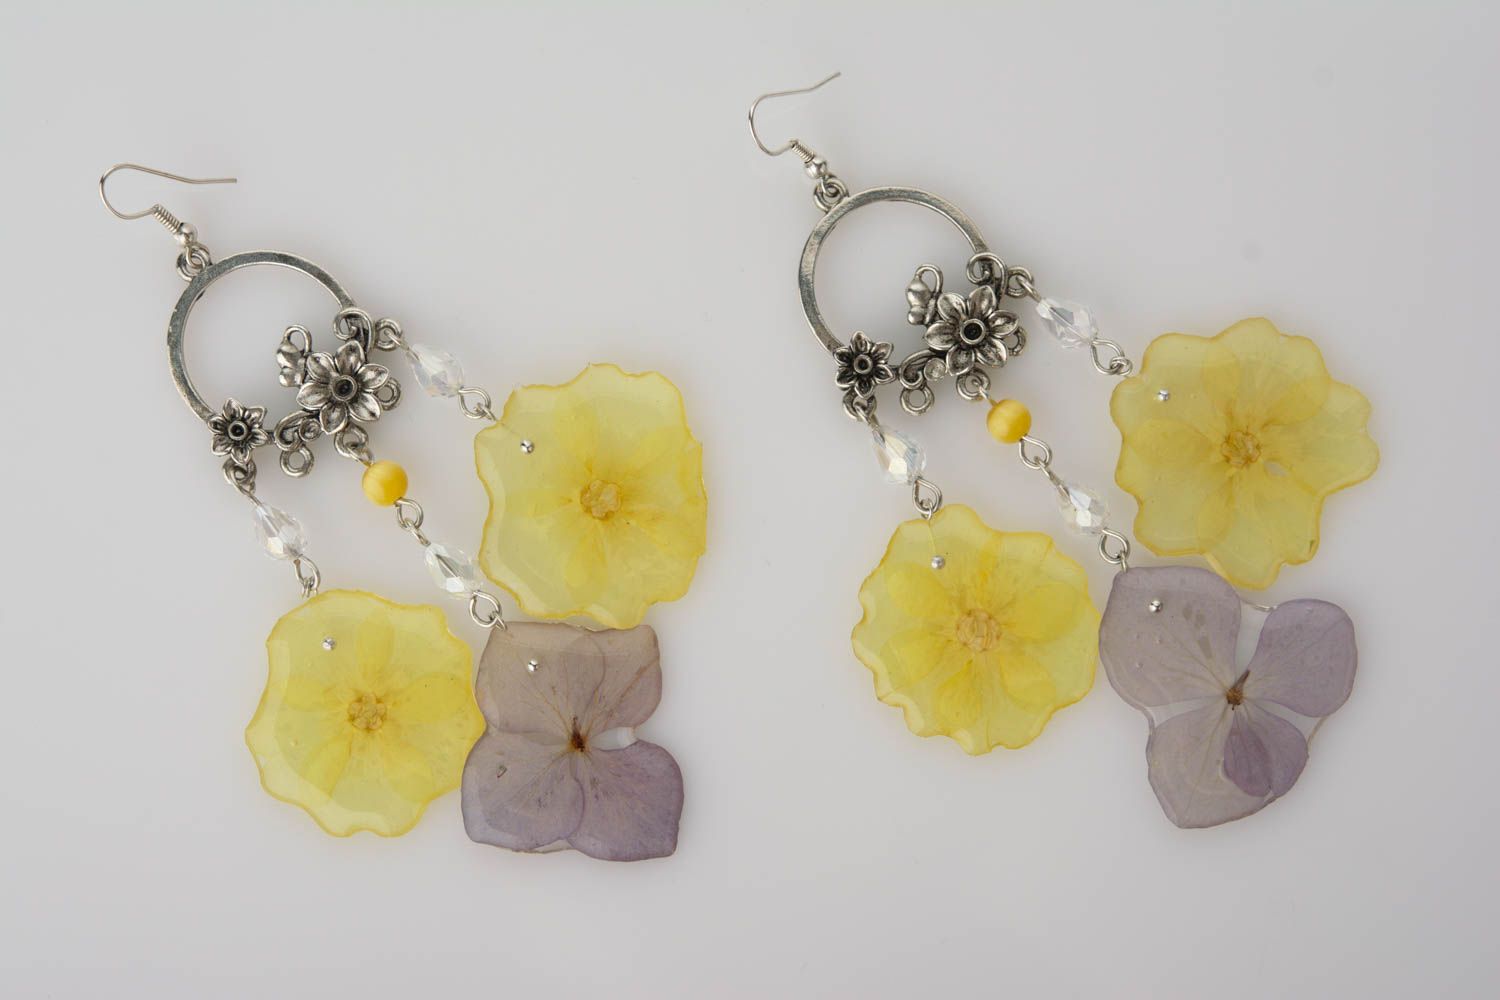 Handmade decorative earrings with primrose and hydrangea petals in epoxy resin photo 1